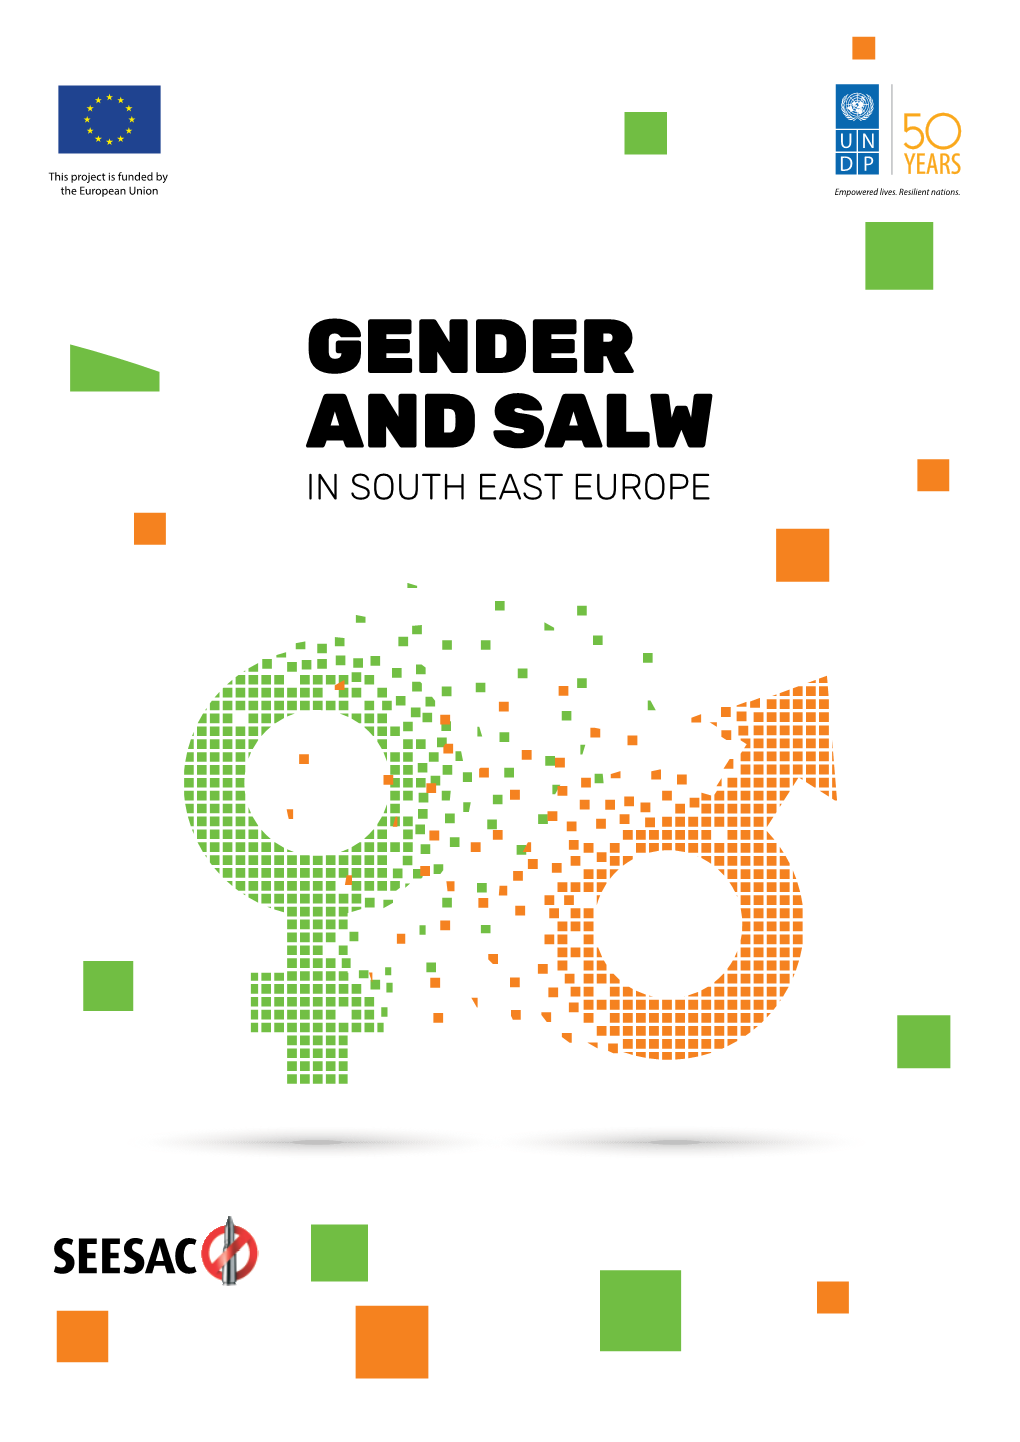 Gender and Salw in South East Europe